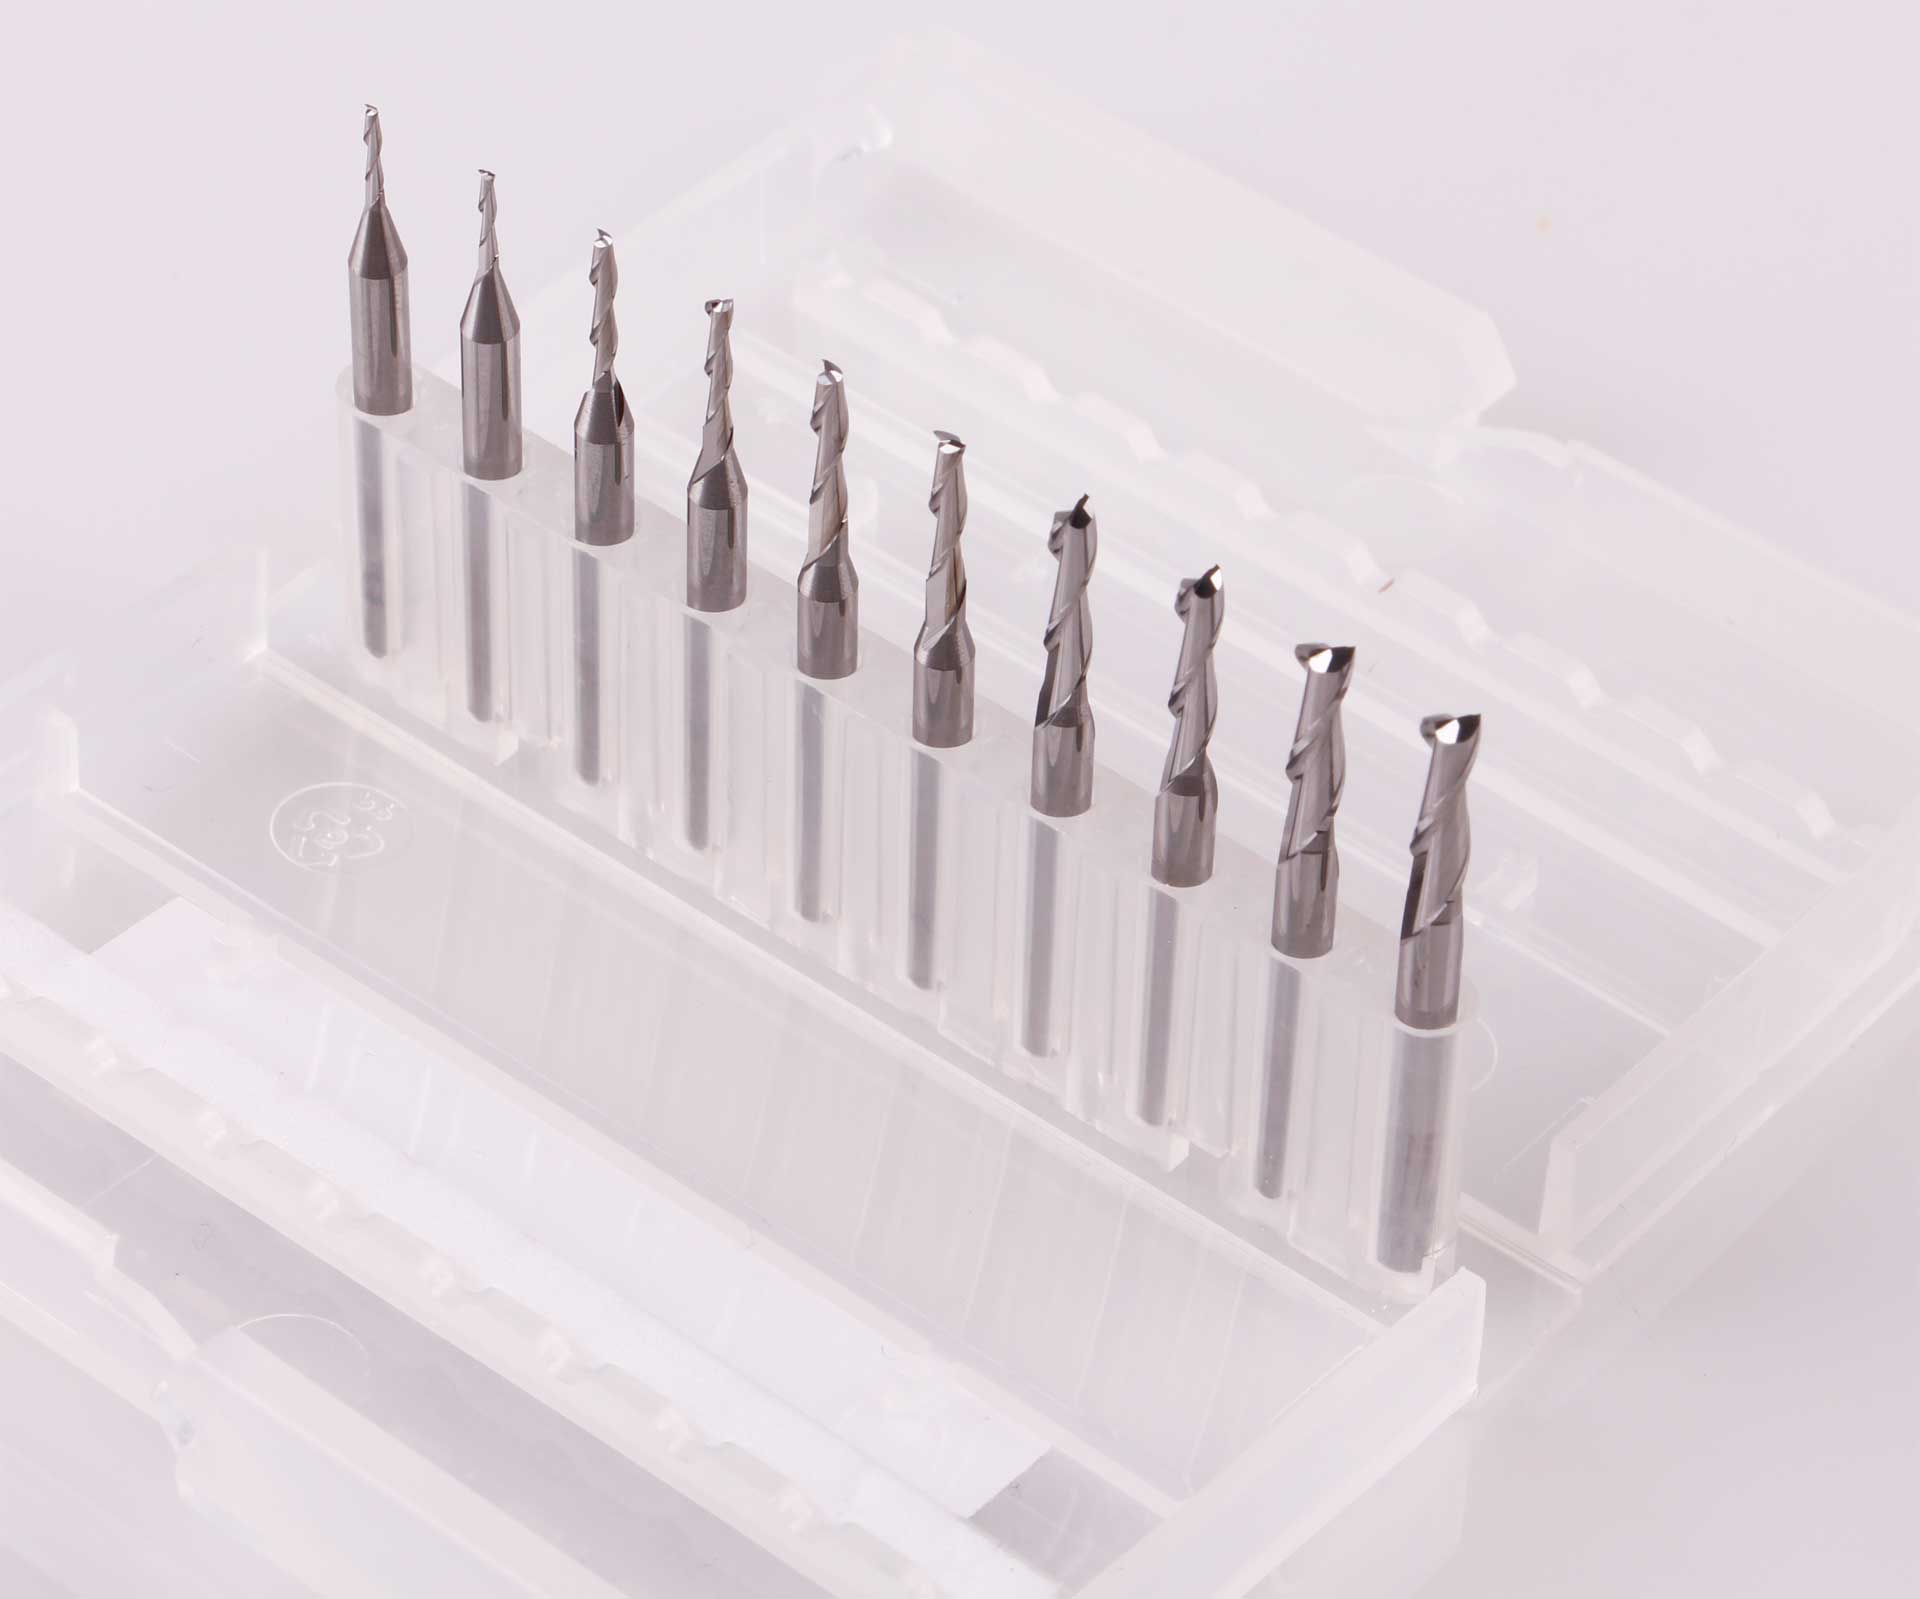 PLANET-HOBBY Two-cutter solid carbide milling cutter Set of 10pcs (1.0/1.5/2.0/2.5/3.0mm)